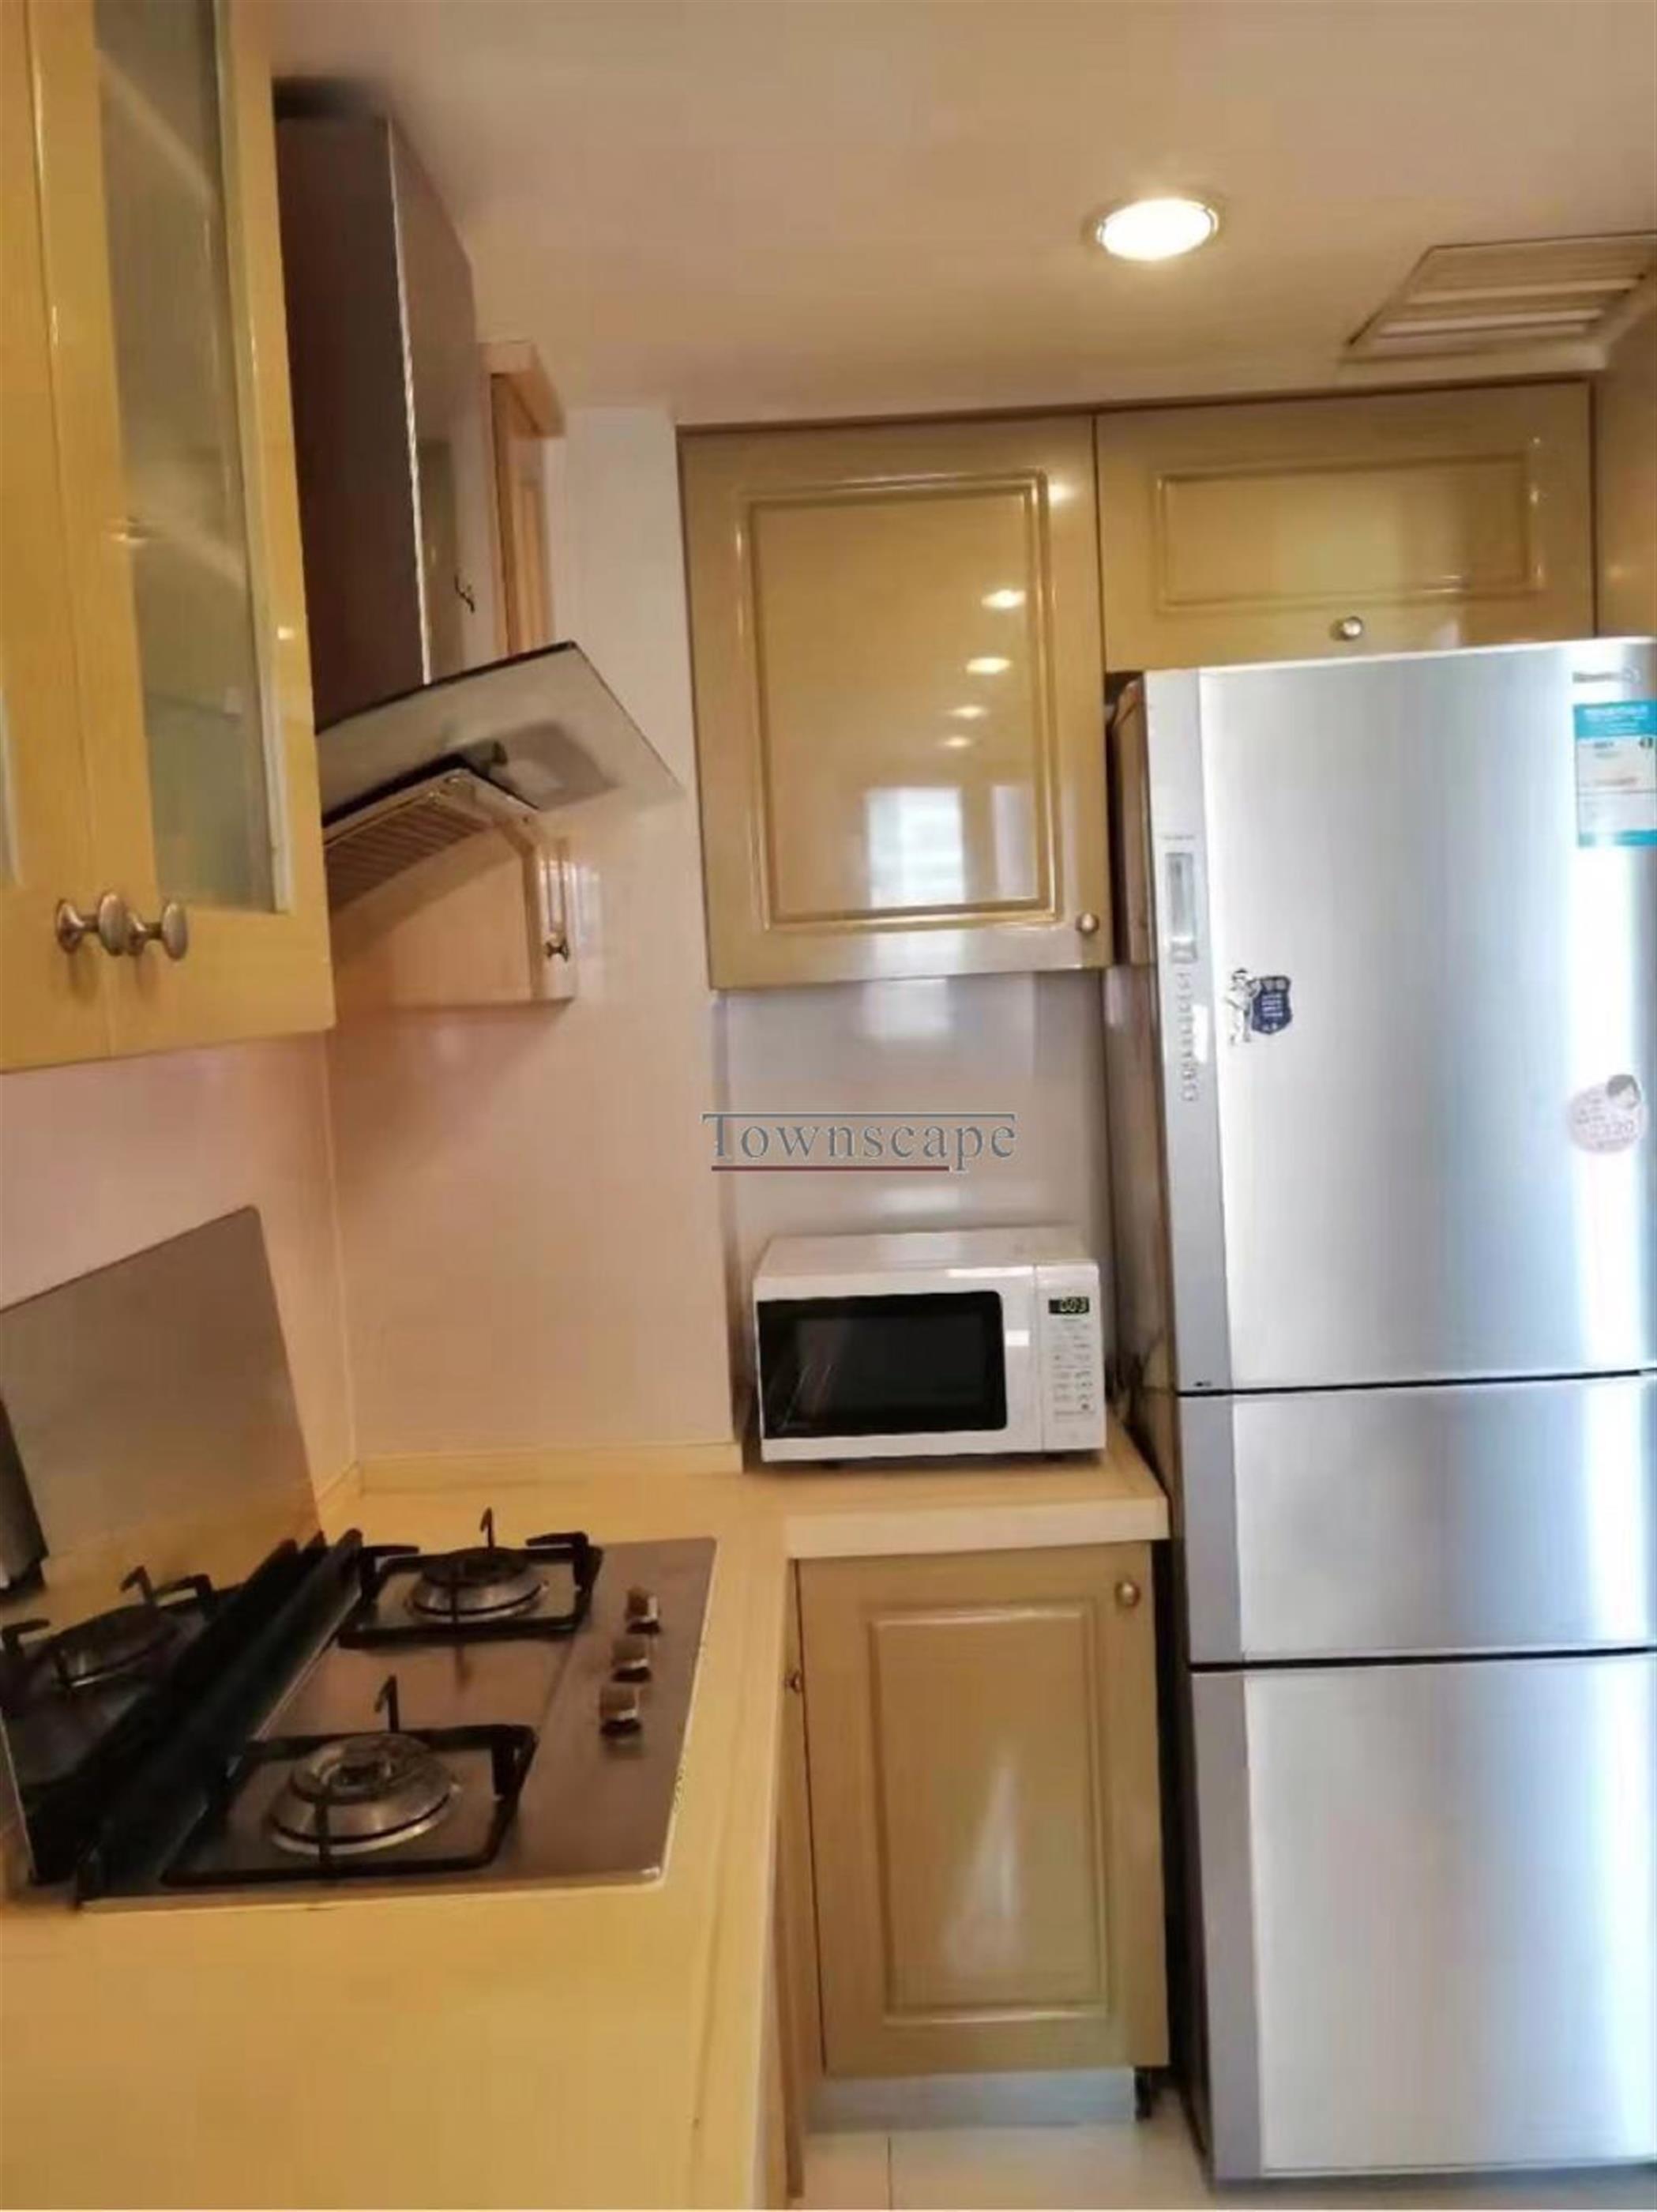 microwave Great Value Spacious Bright 3BR Apartment Near LN 10 & Zoo for Rent in Shanghai